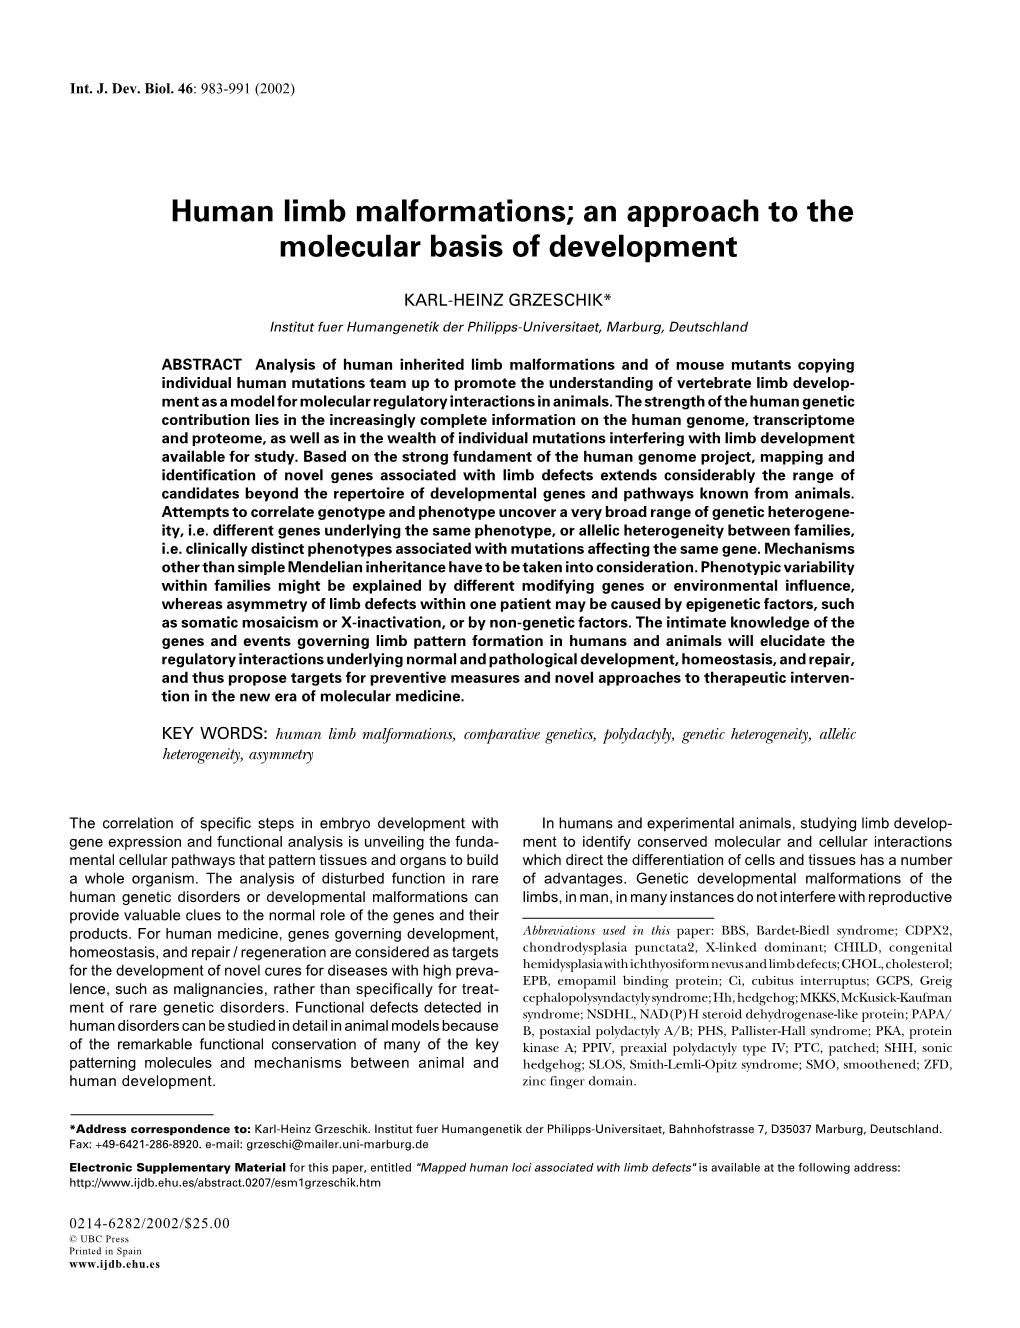 Human Limb Malformations; an Approach to the Molecular Basis of Development